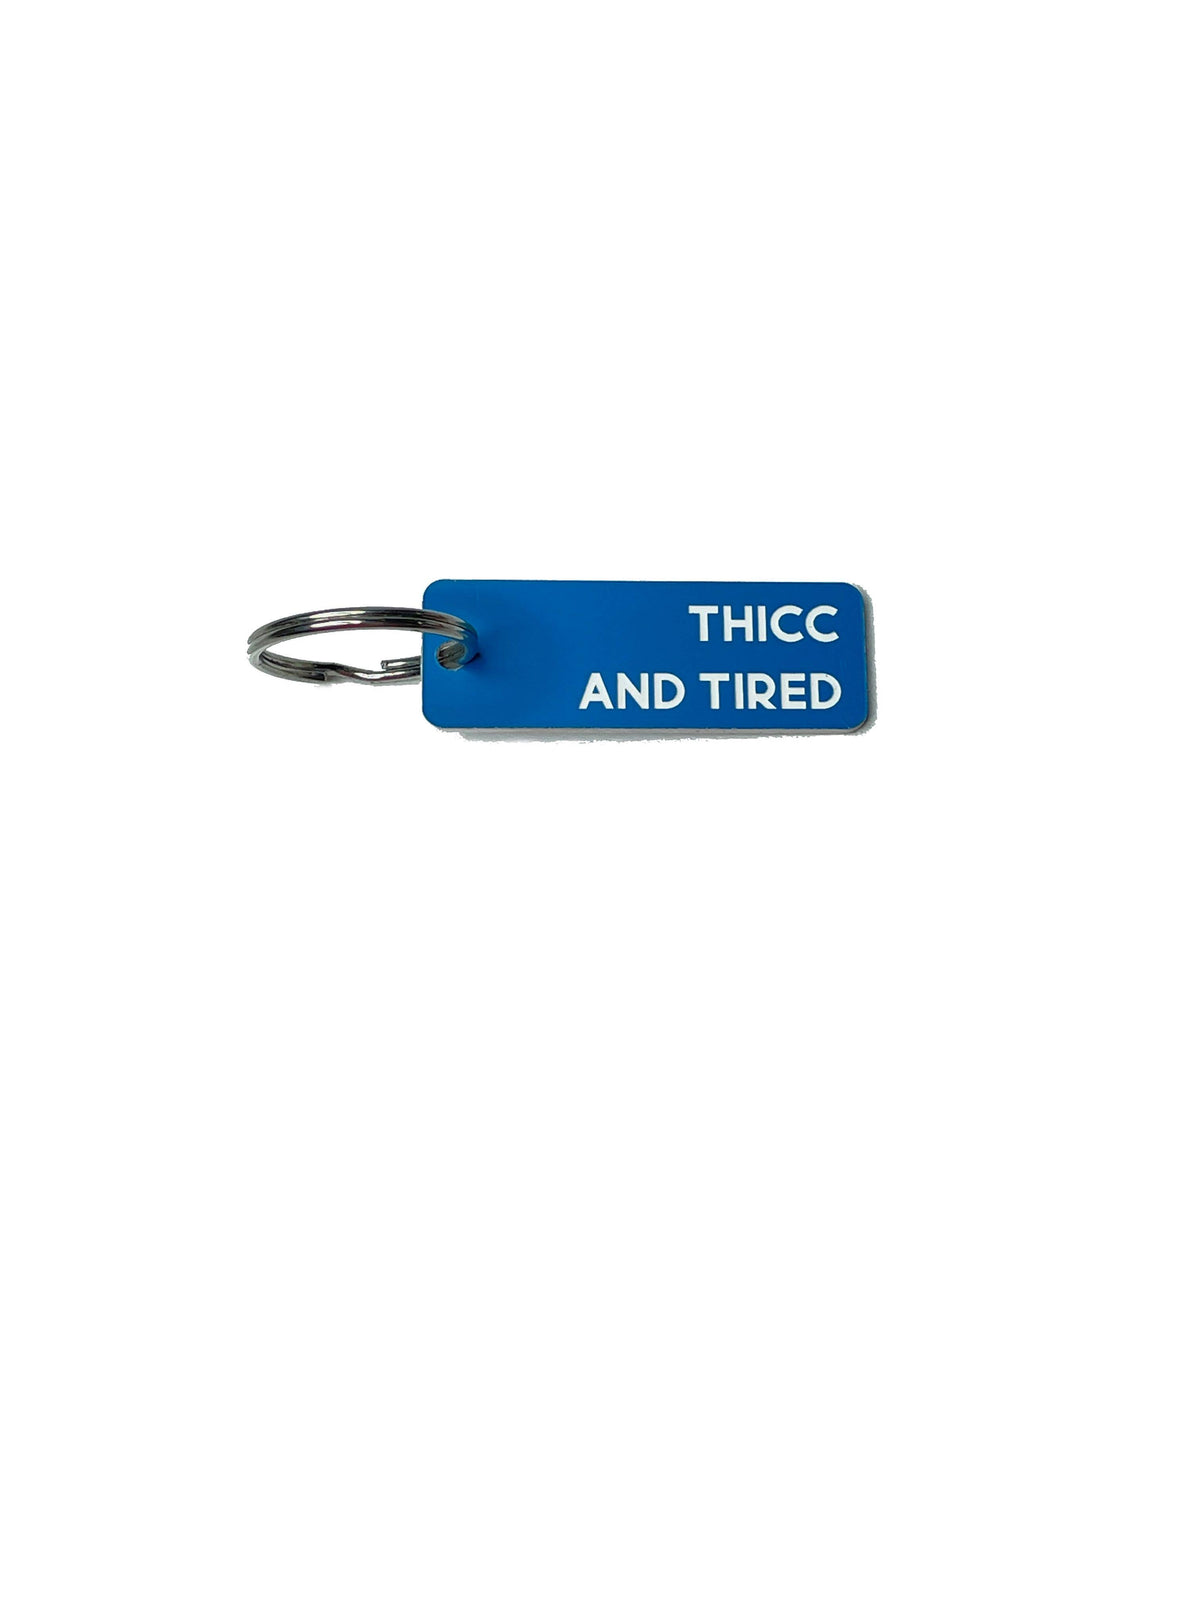 Thicc and Tired - Acrylic Key Tag: Gray/White